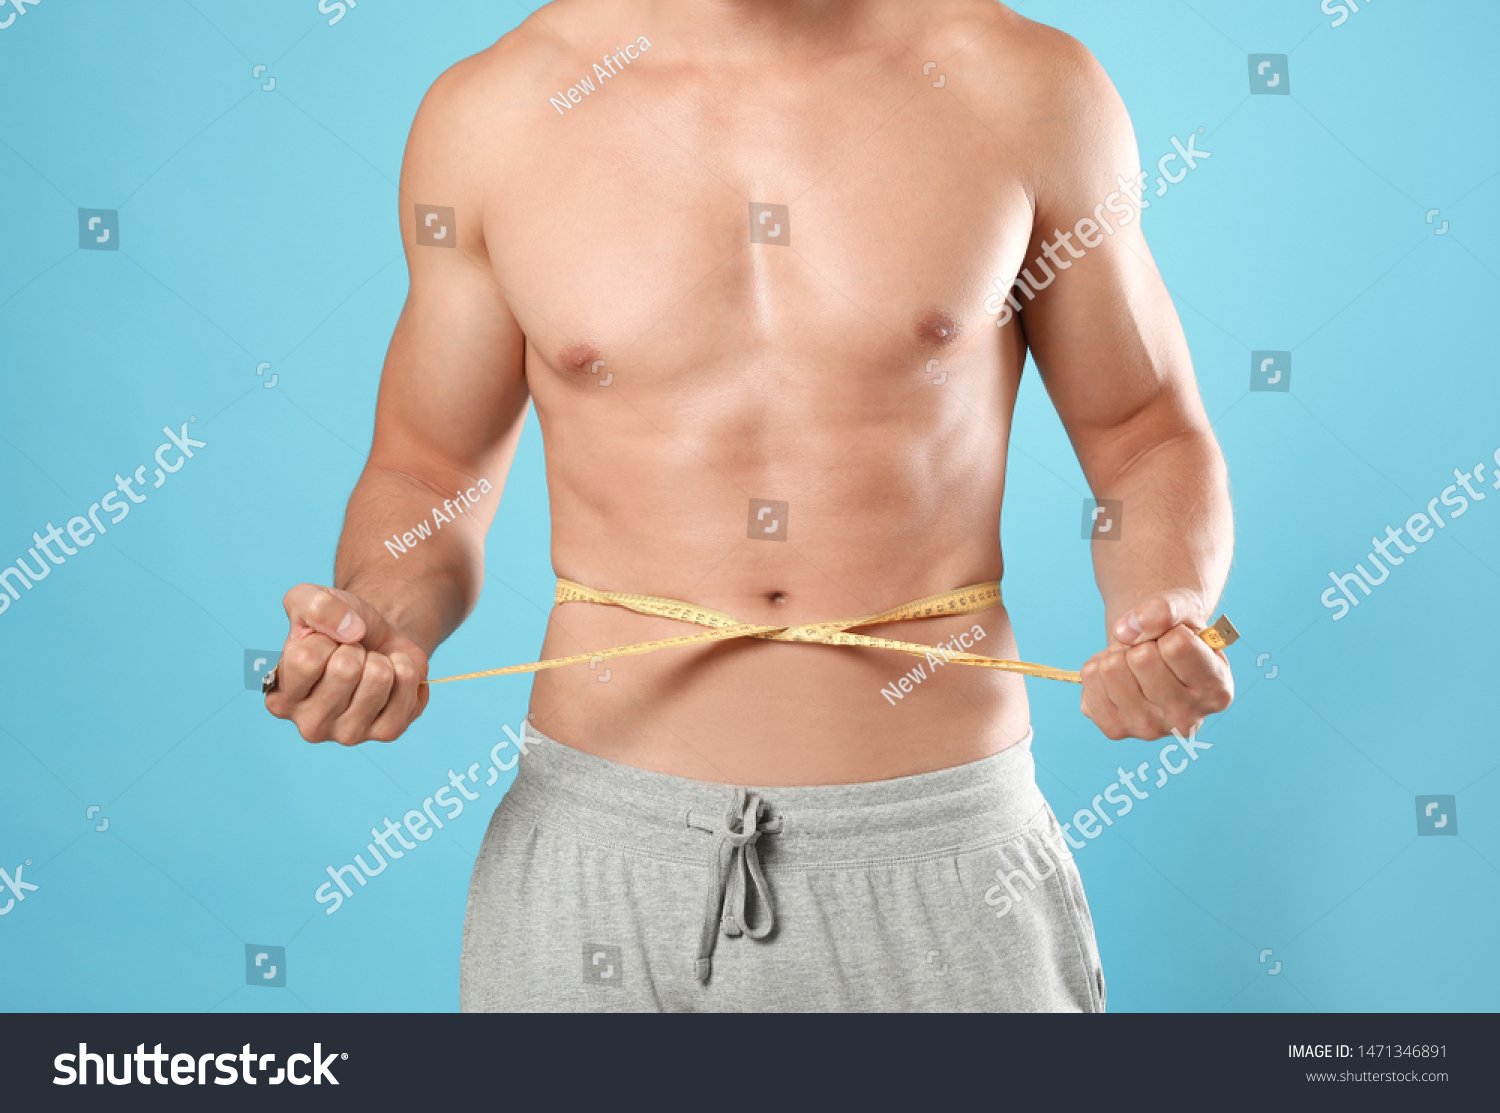 Young man with slim body using measuring tape on light blue background, closeup view #1471346891